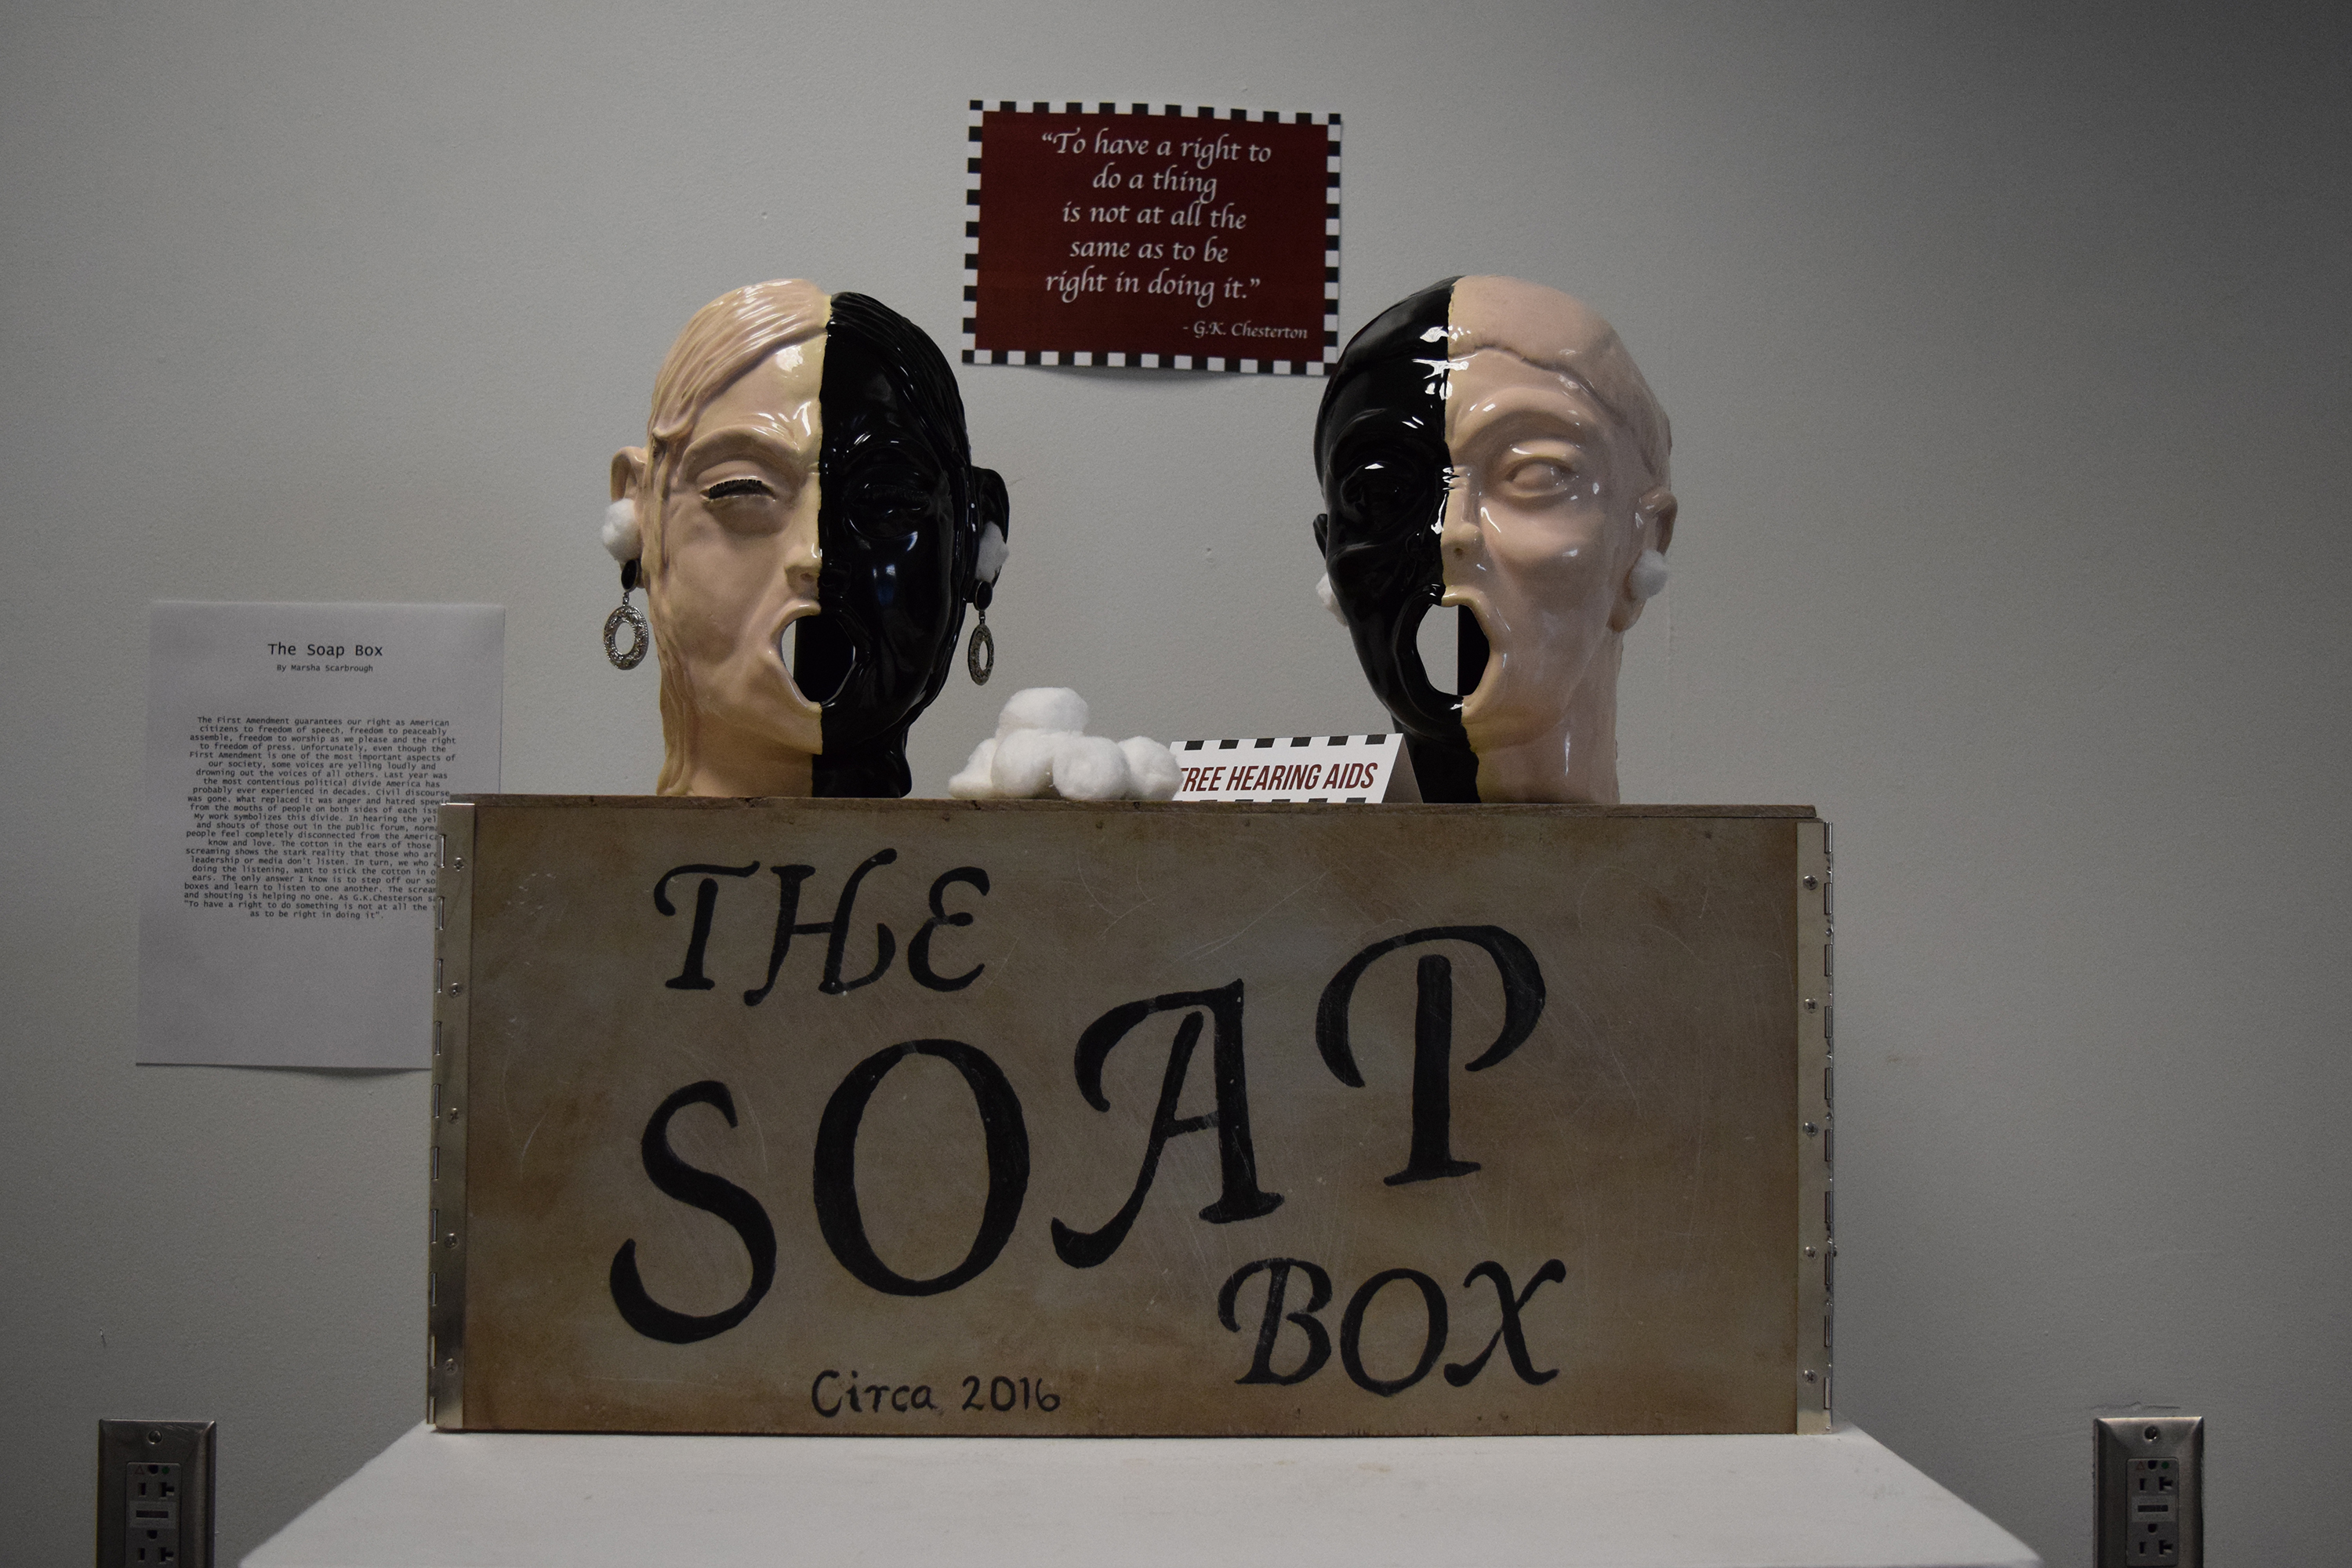 Box with "The Soap Box" written on the front side. On top of the box are two heads, each split with one side tan and the other black. Cotton balls are in the ears. One head has earrings.